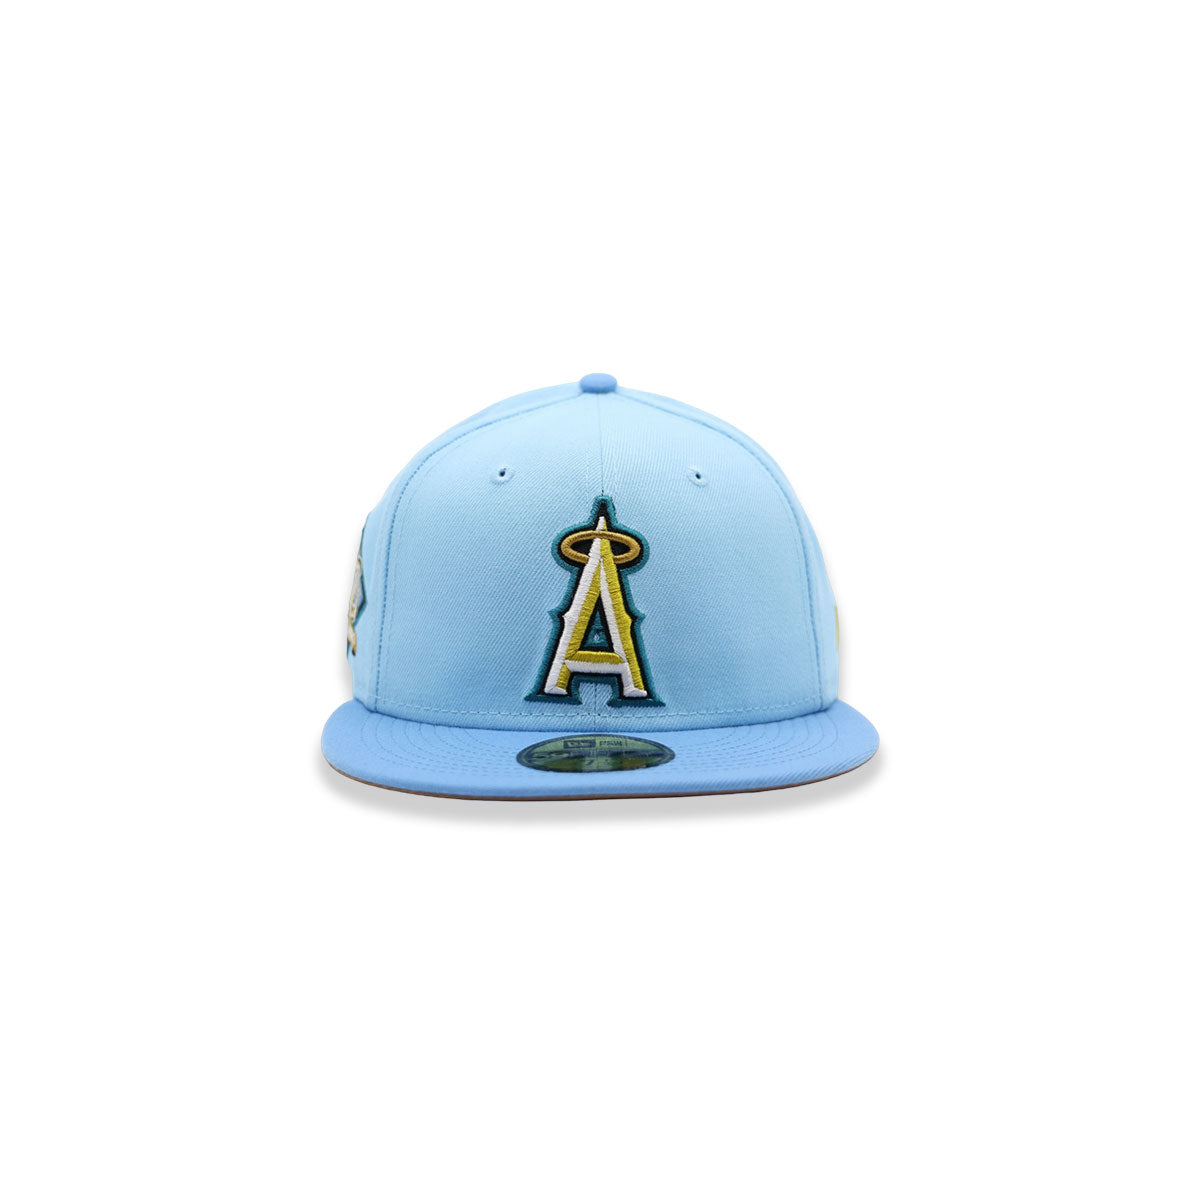 New Era Anaheim Angels 60th Anniversary Patch Fitted